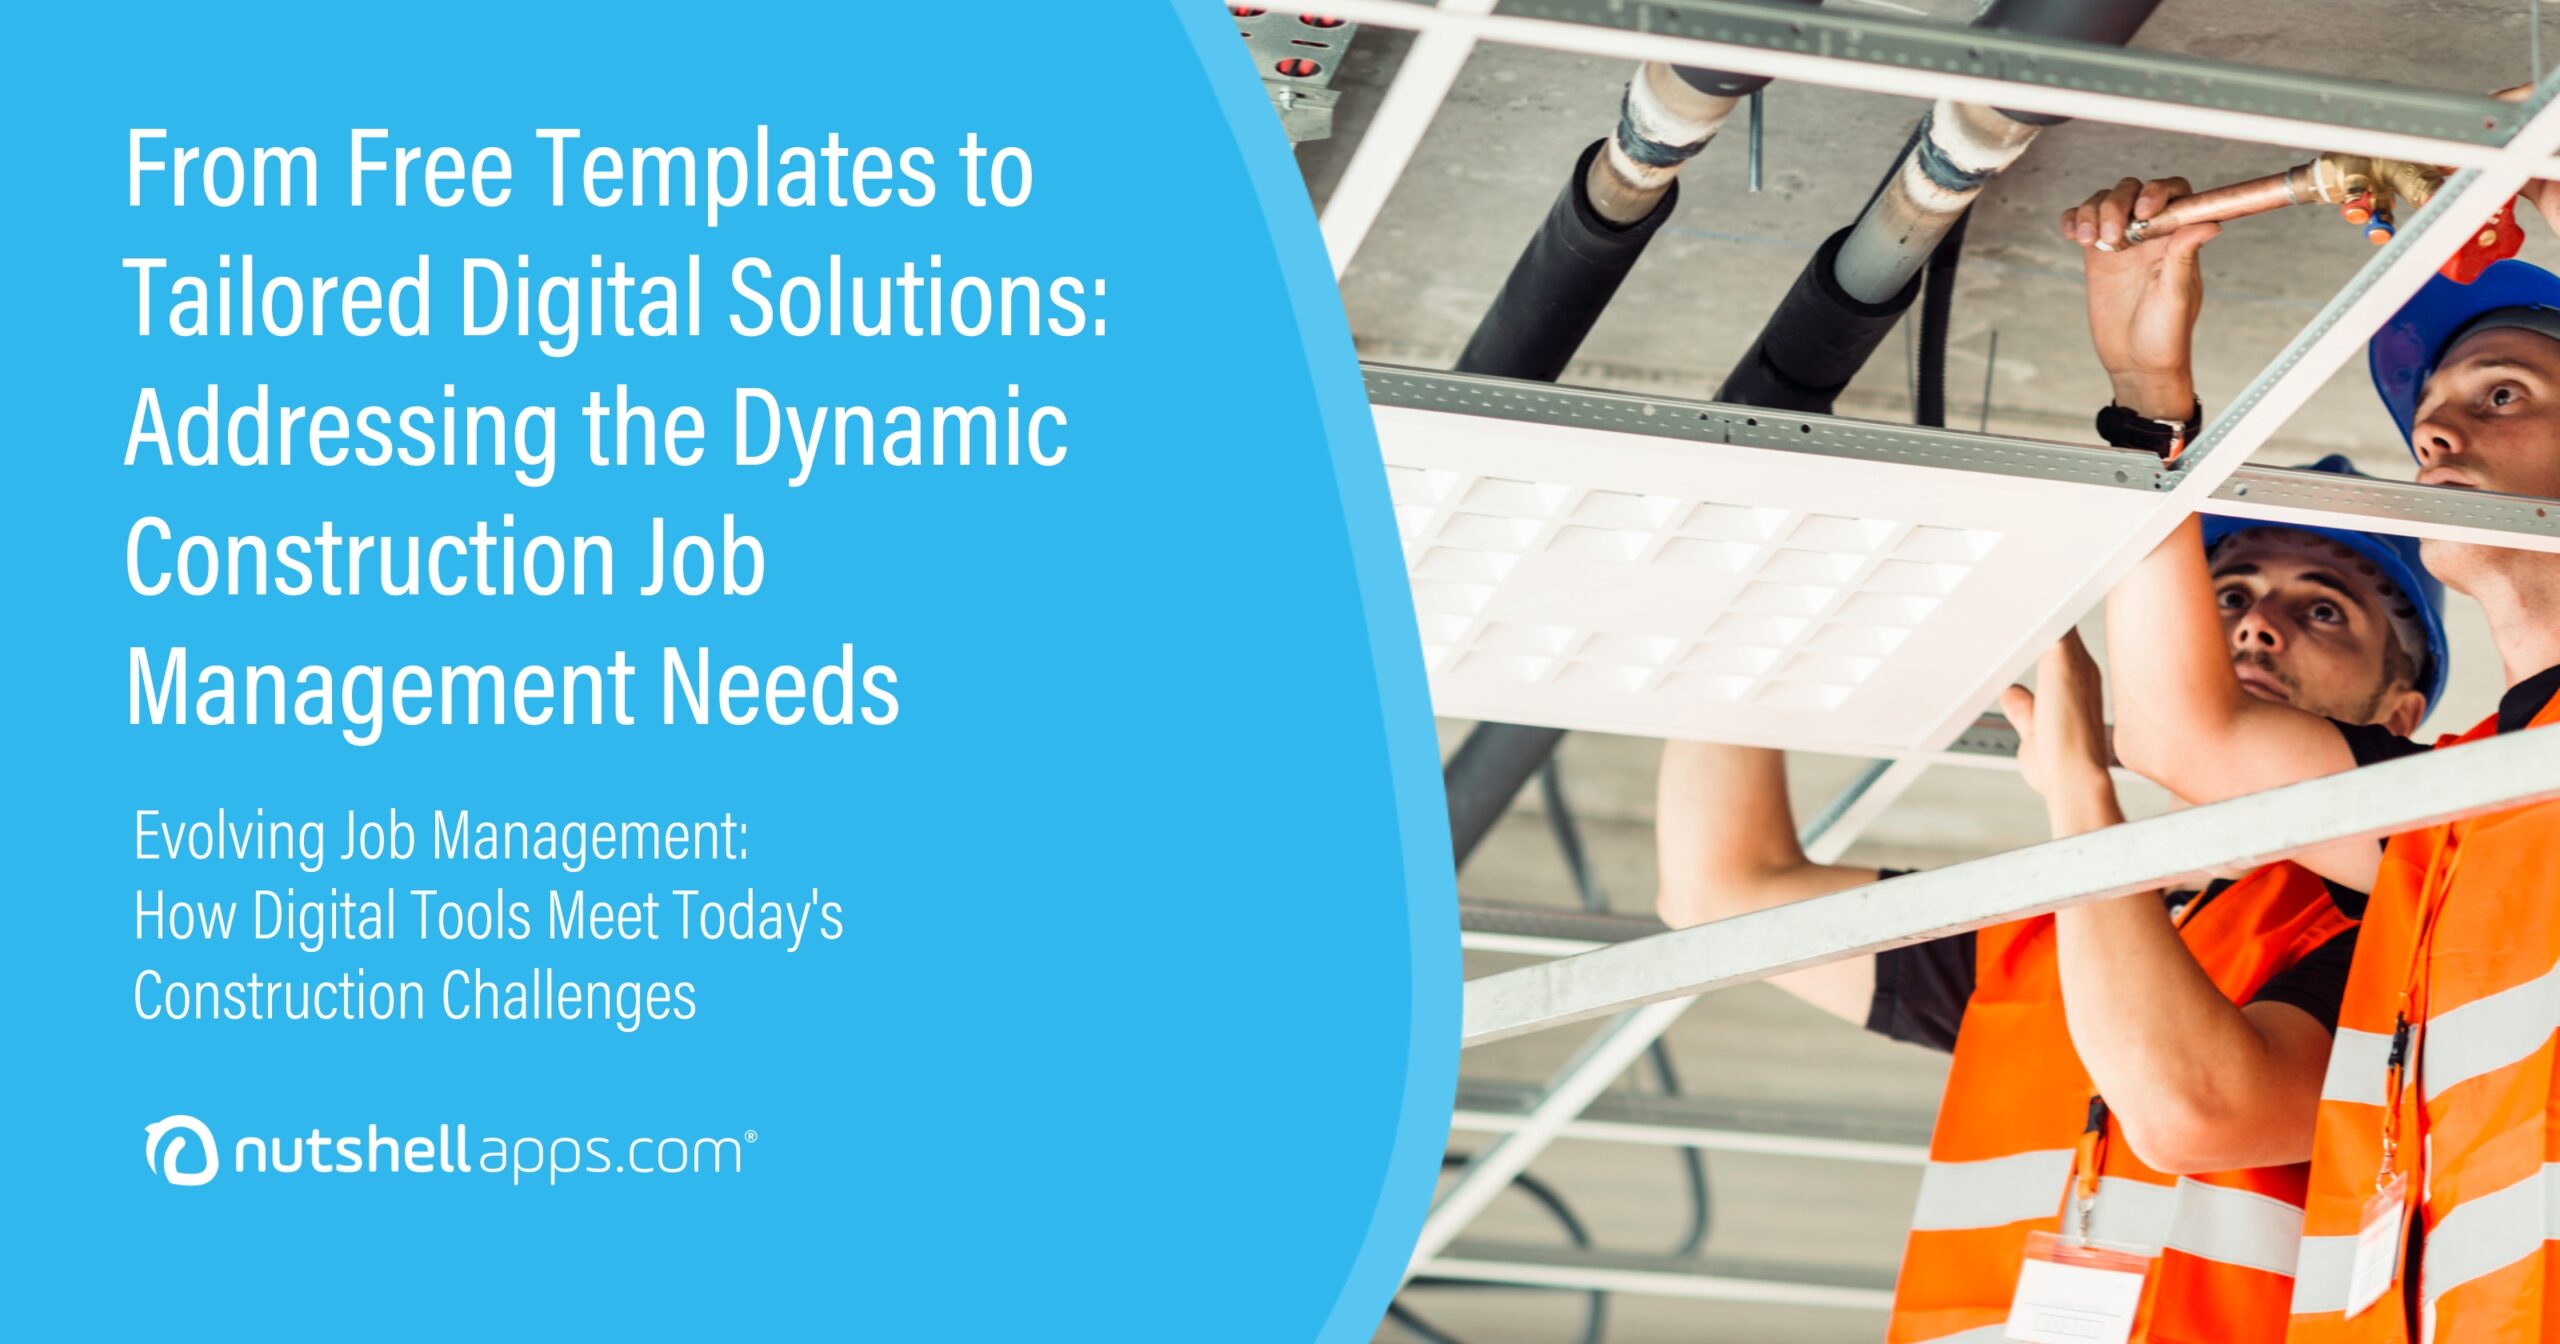 Blog | From Free Templates to Tailored Digital Solutions: Addressing the Dynamic Construction Job Management Needs